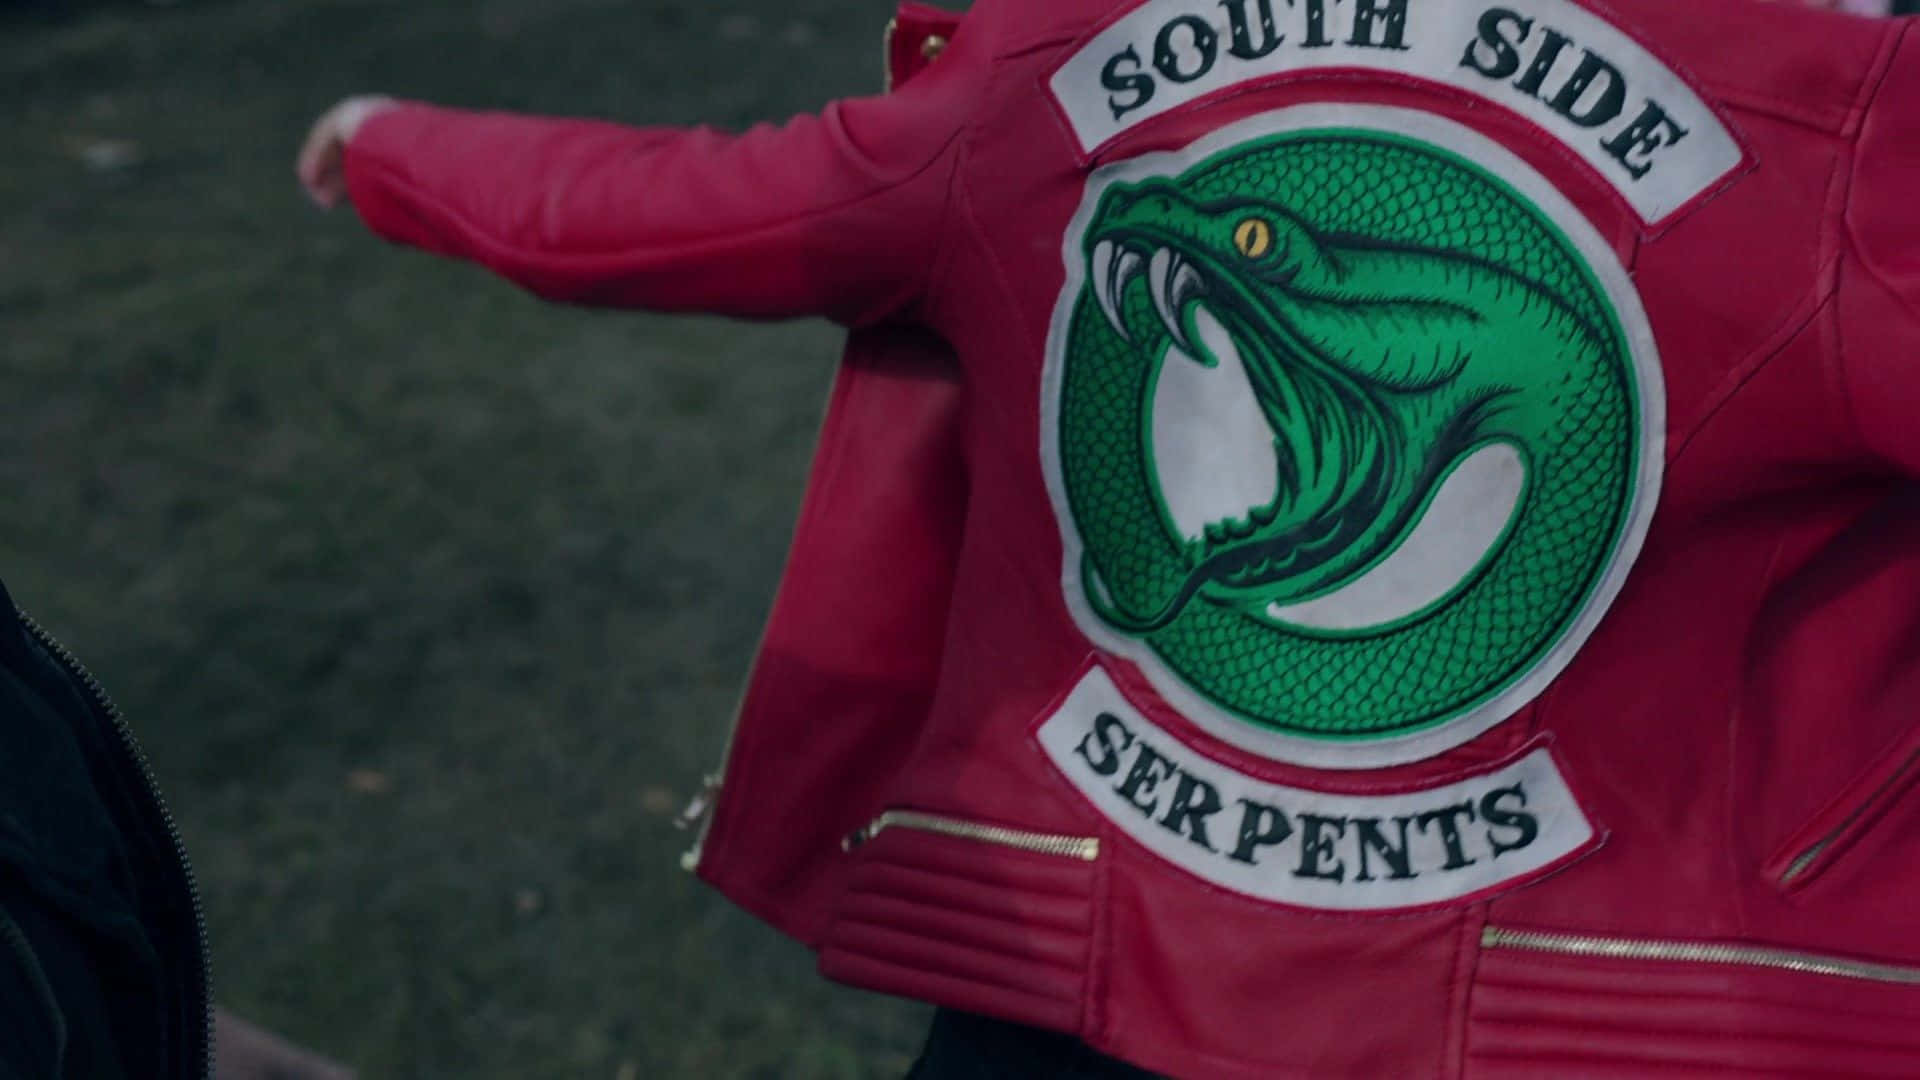 Join the Southside Serpents Wallpaper